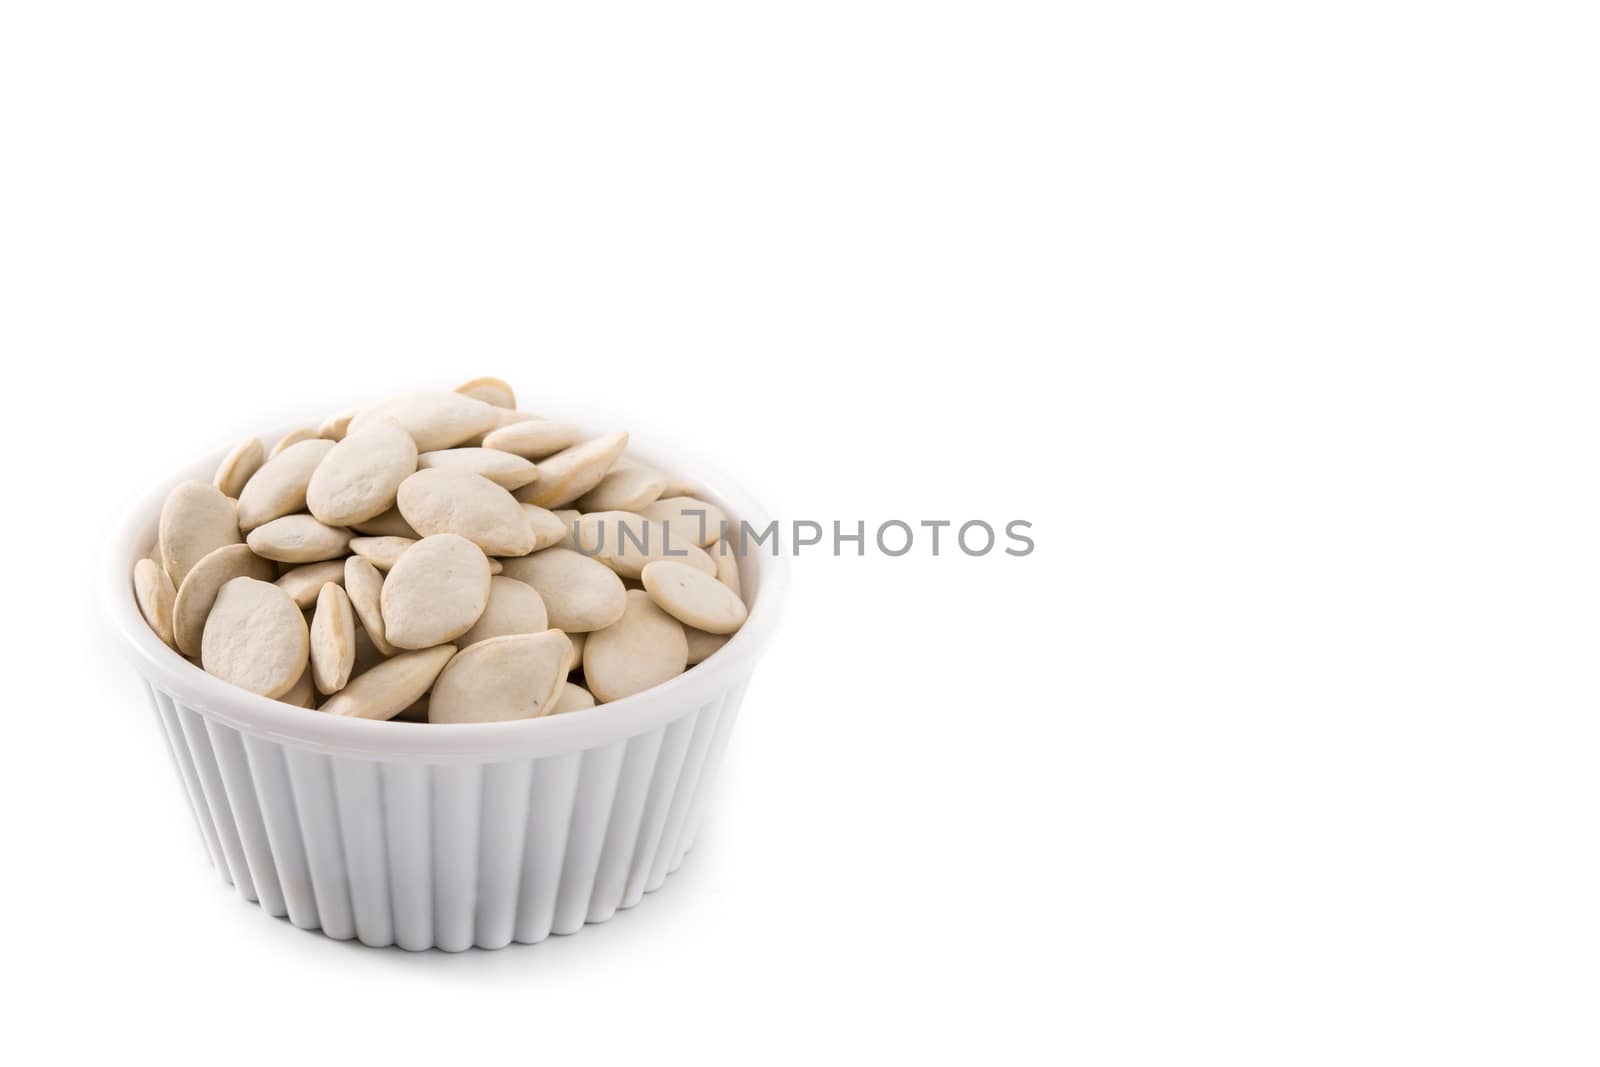 Pumpkin seeds in bowl isolated on white background